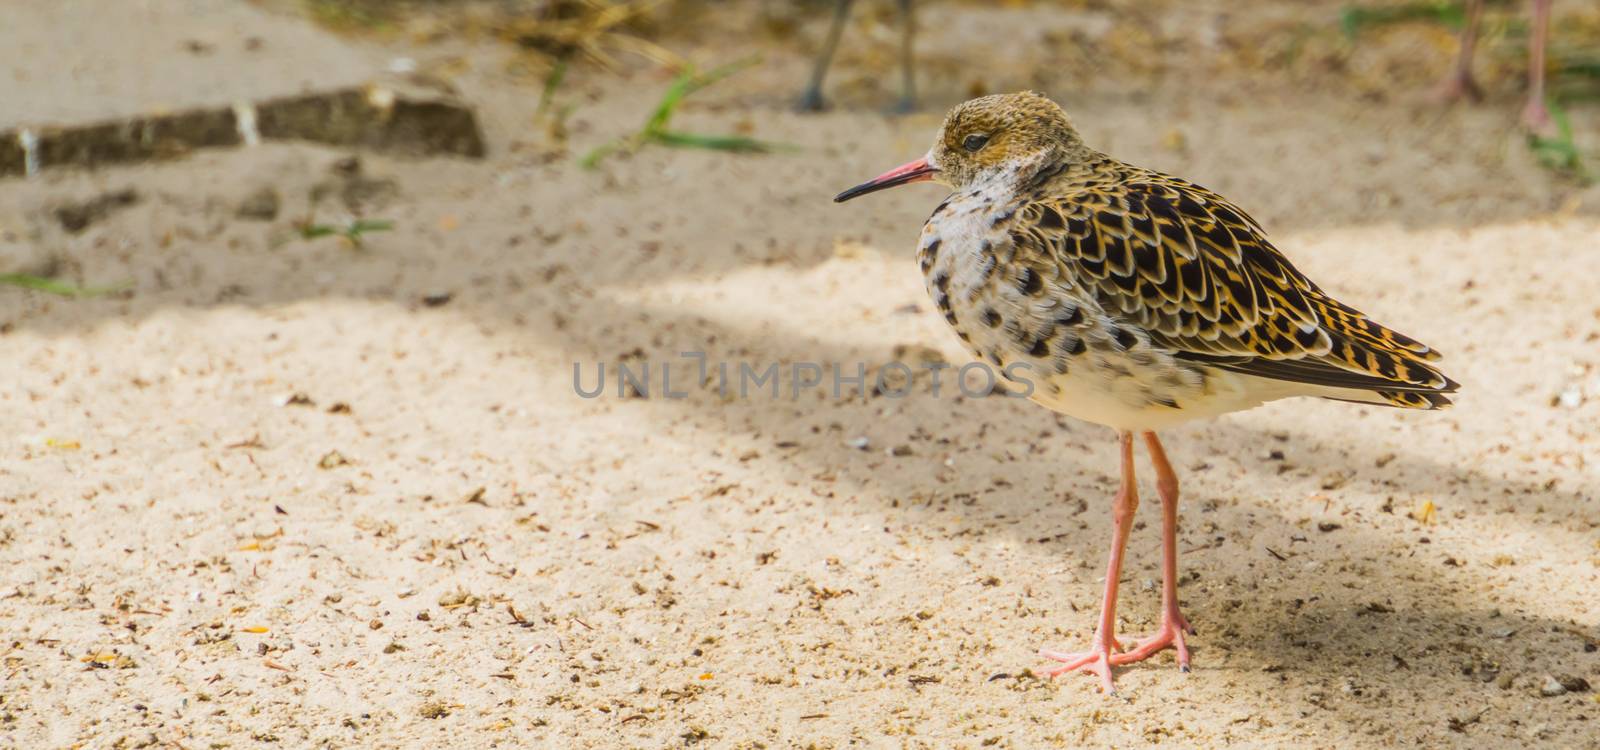 Closeup of a common red shank walking in the sand, Sandpiper from Eurasia, coastal wading bird by charlottebleijenberg